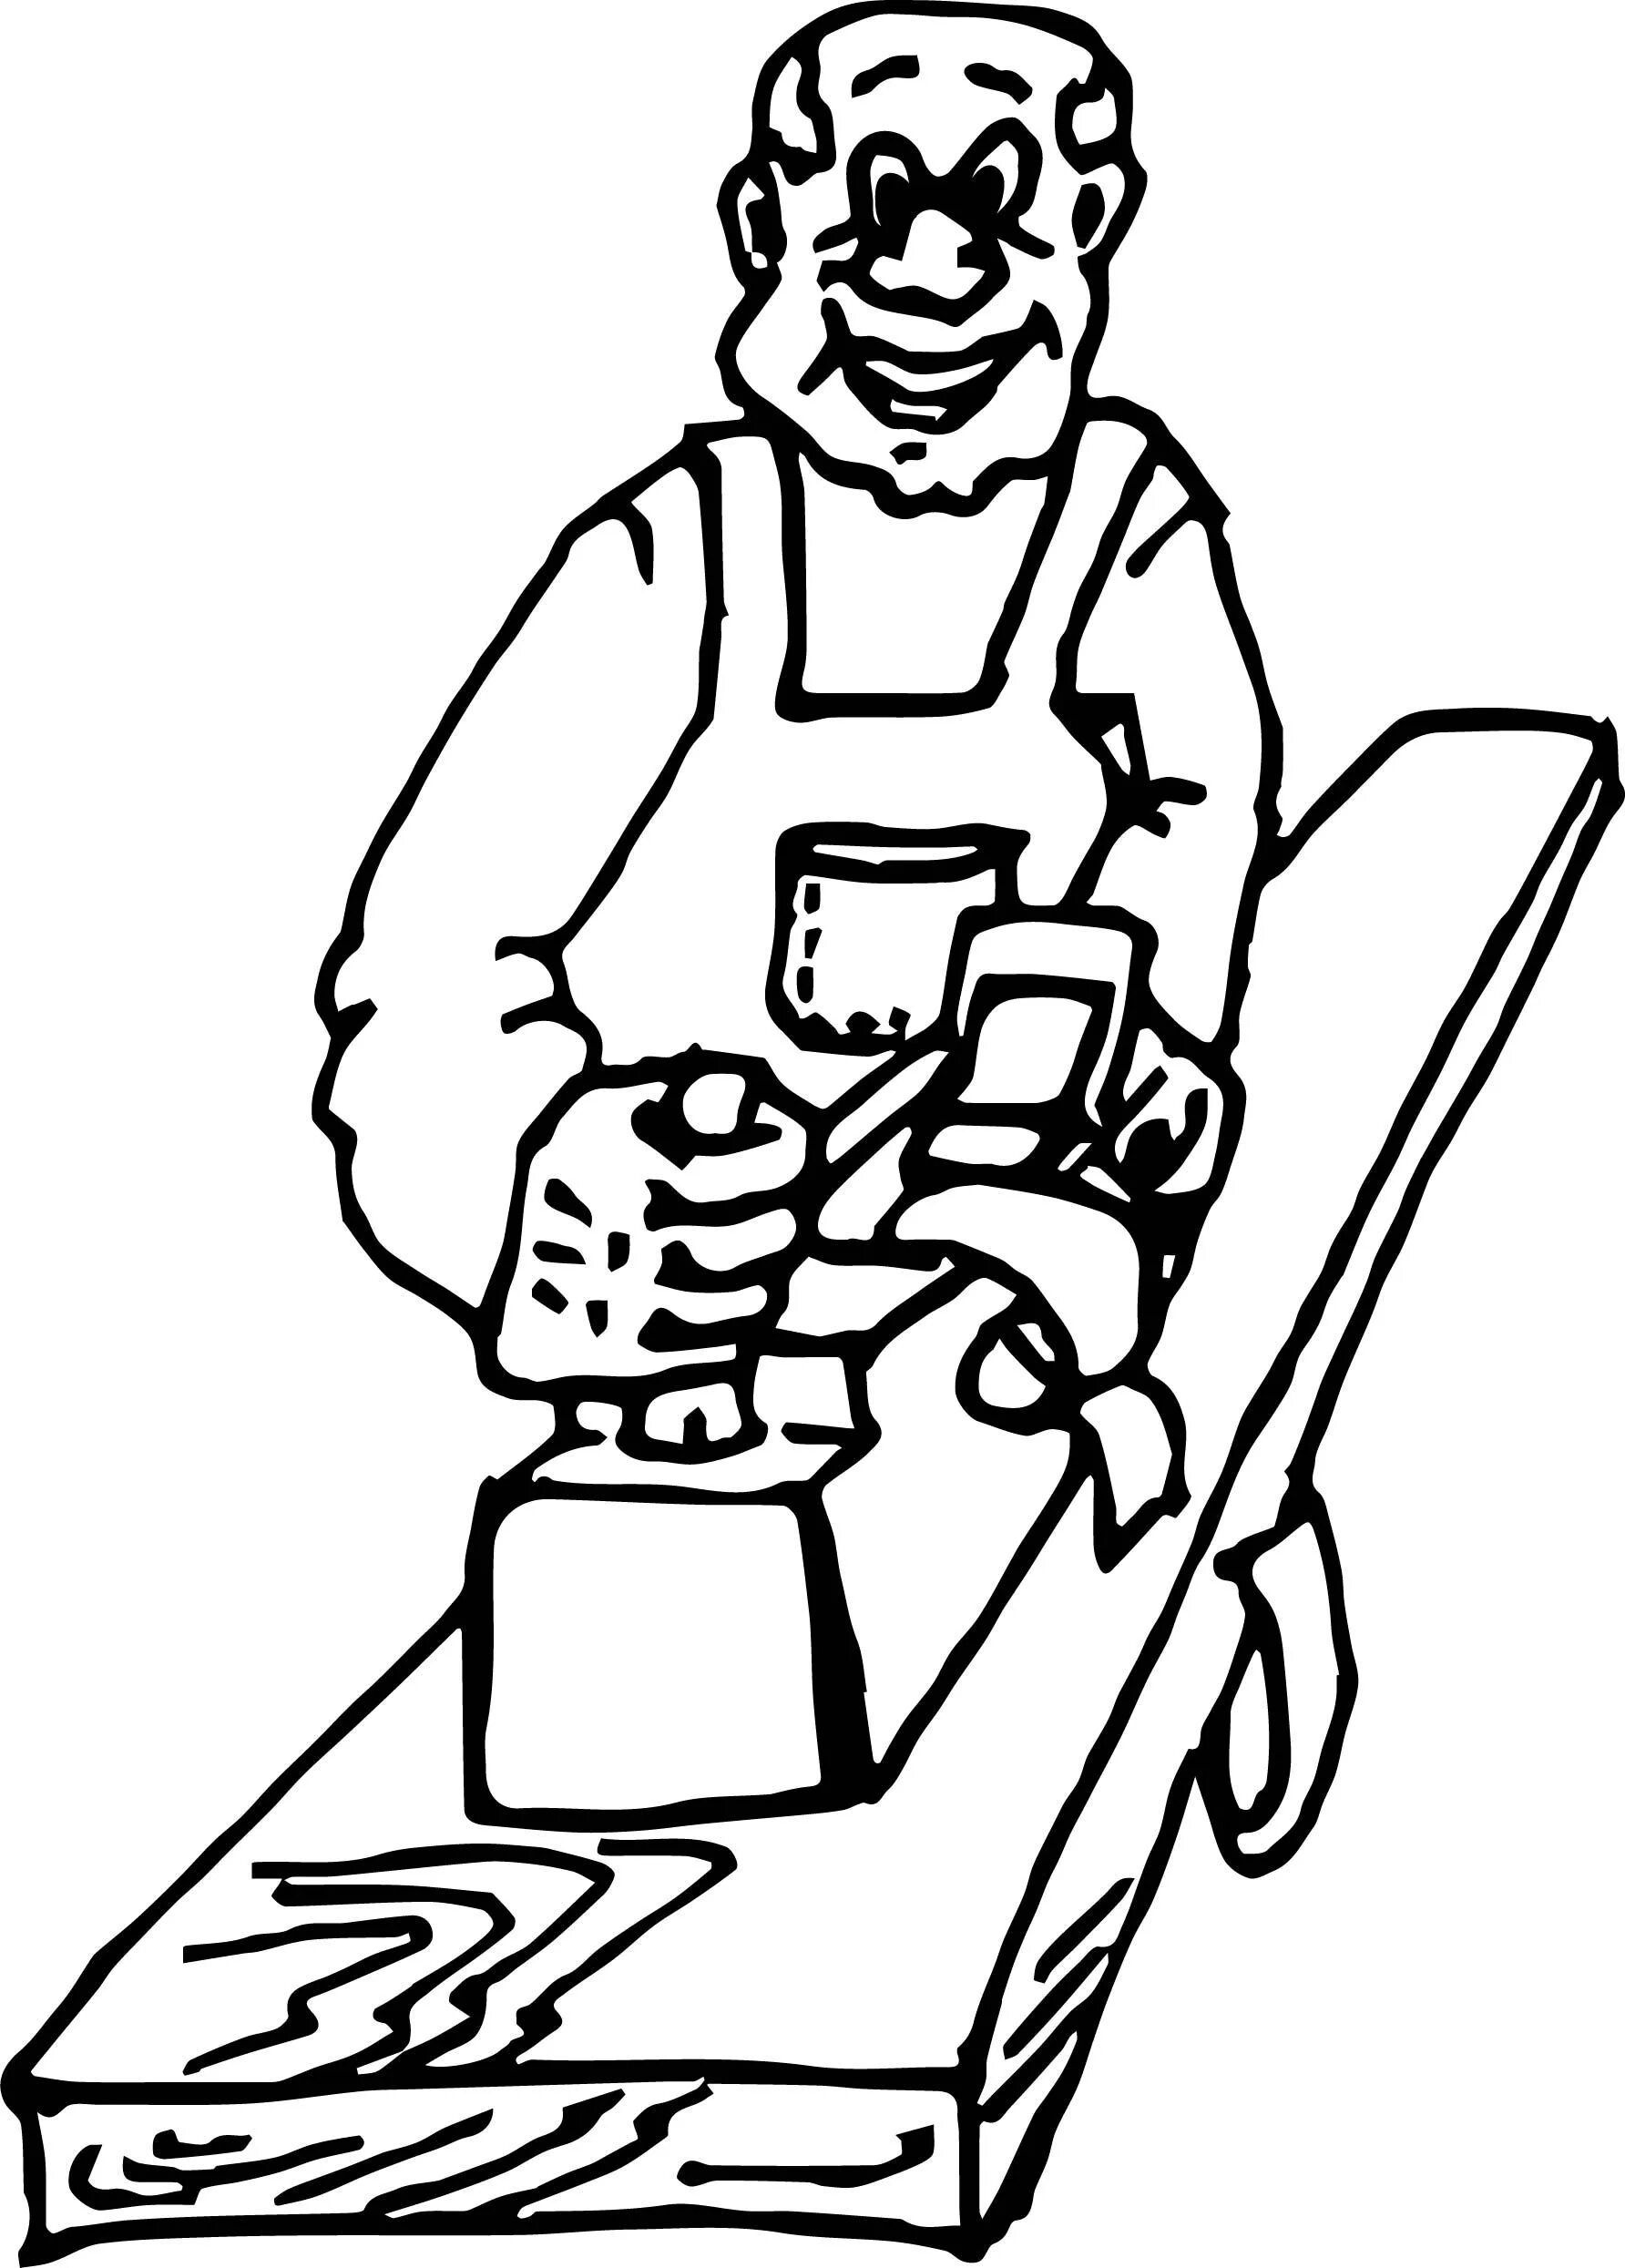 Carpenter's humorous coloring book for the little ones